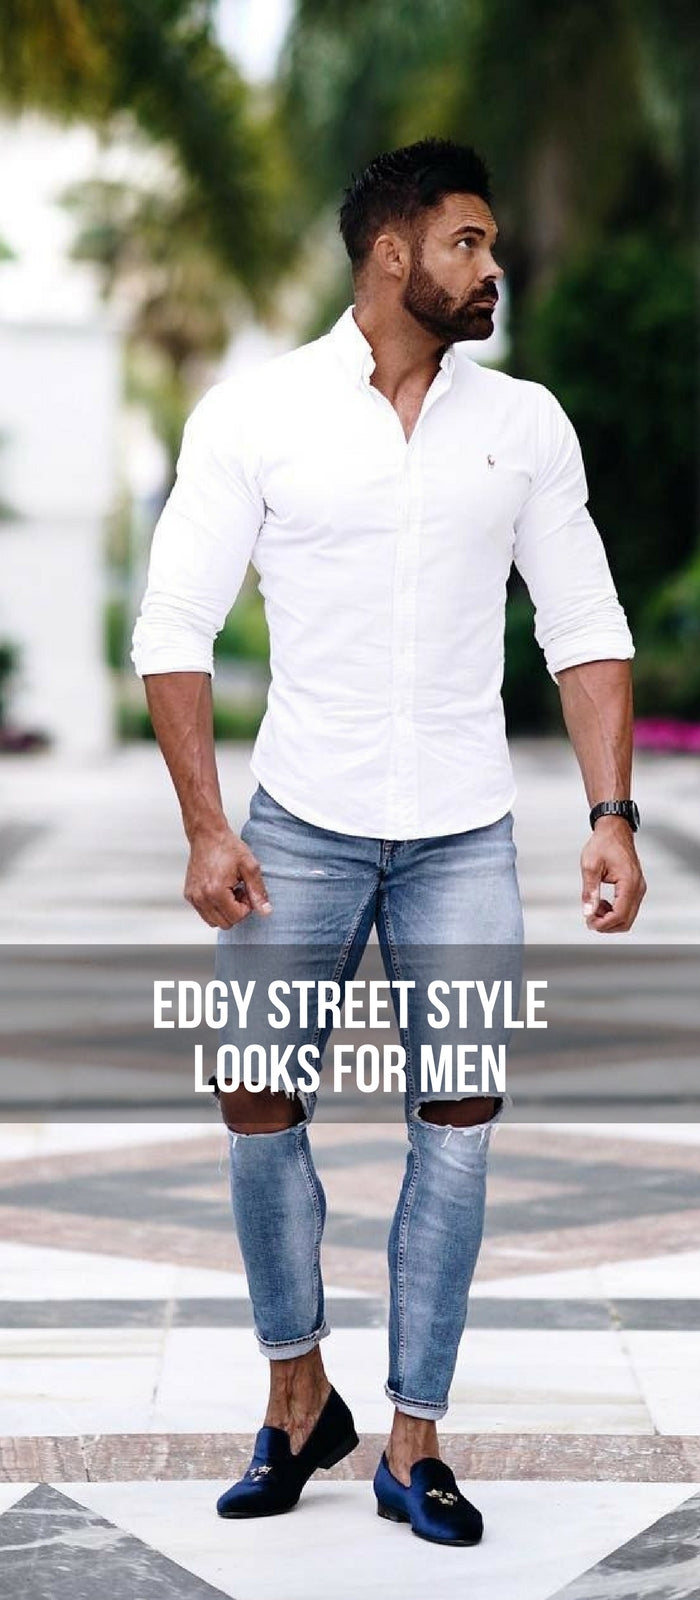 Edgy street style looks for men